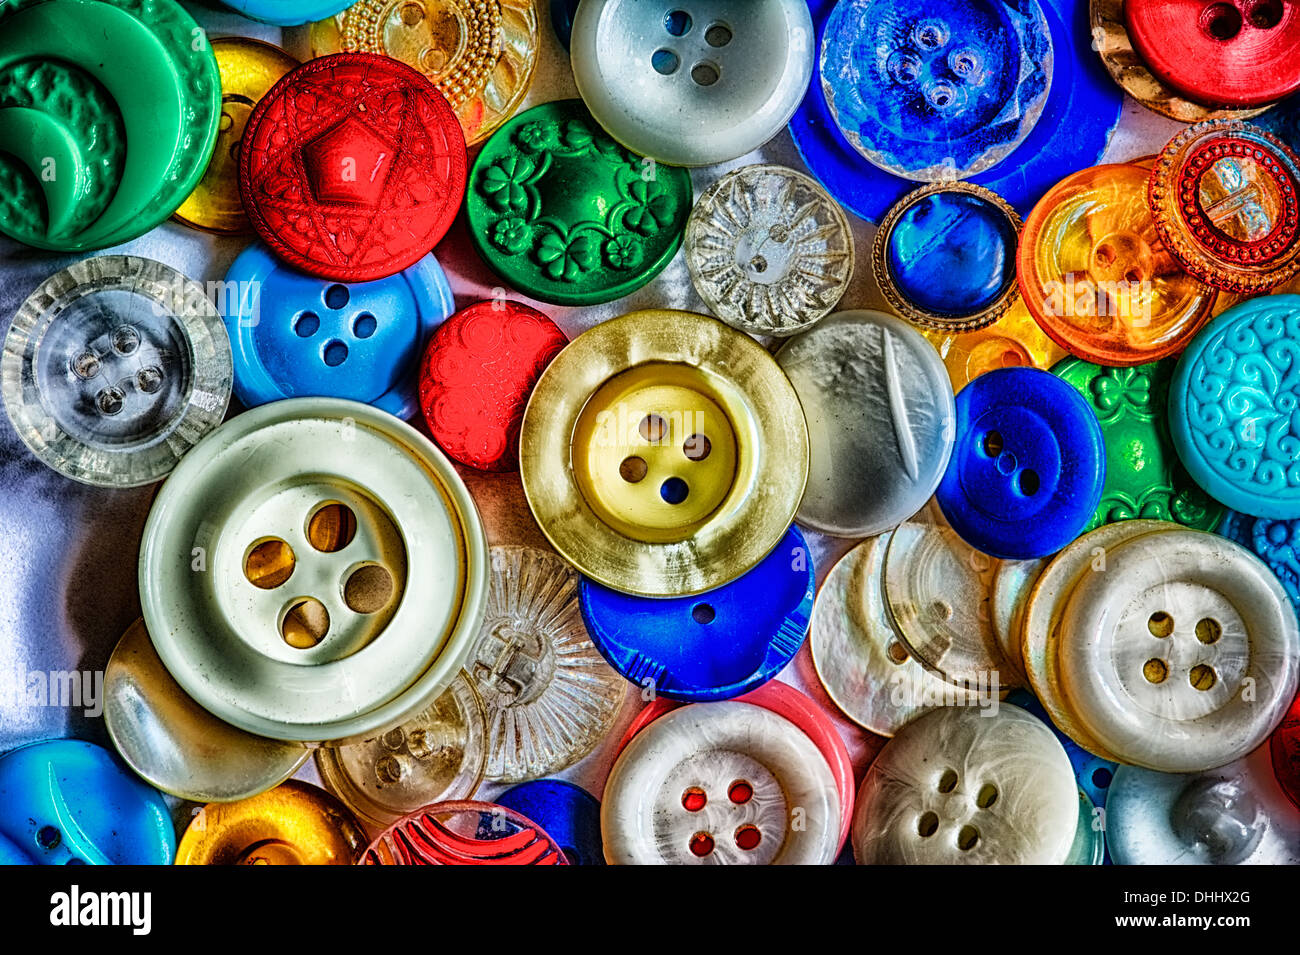 Buttons Stock Photo